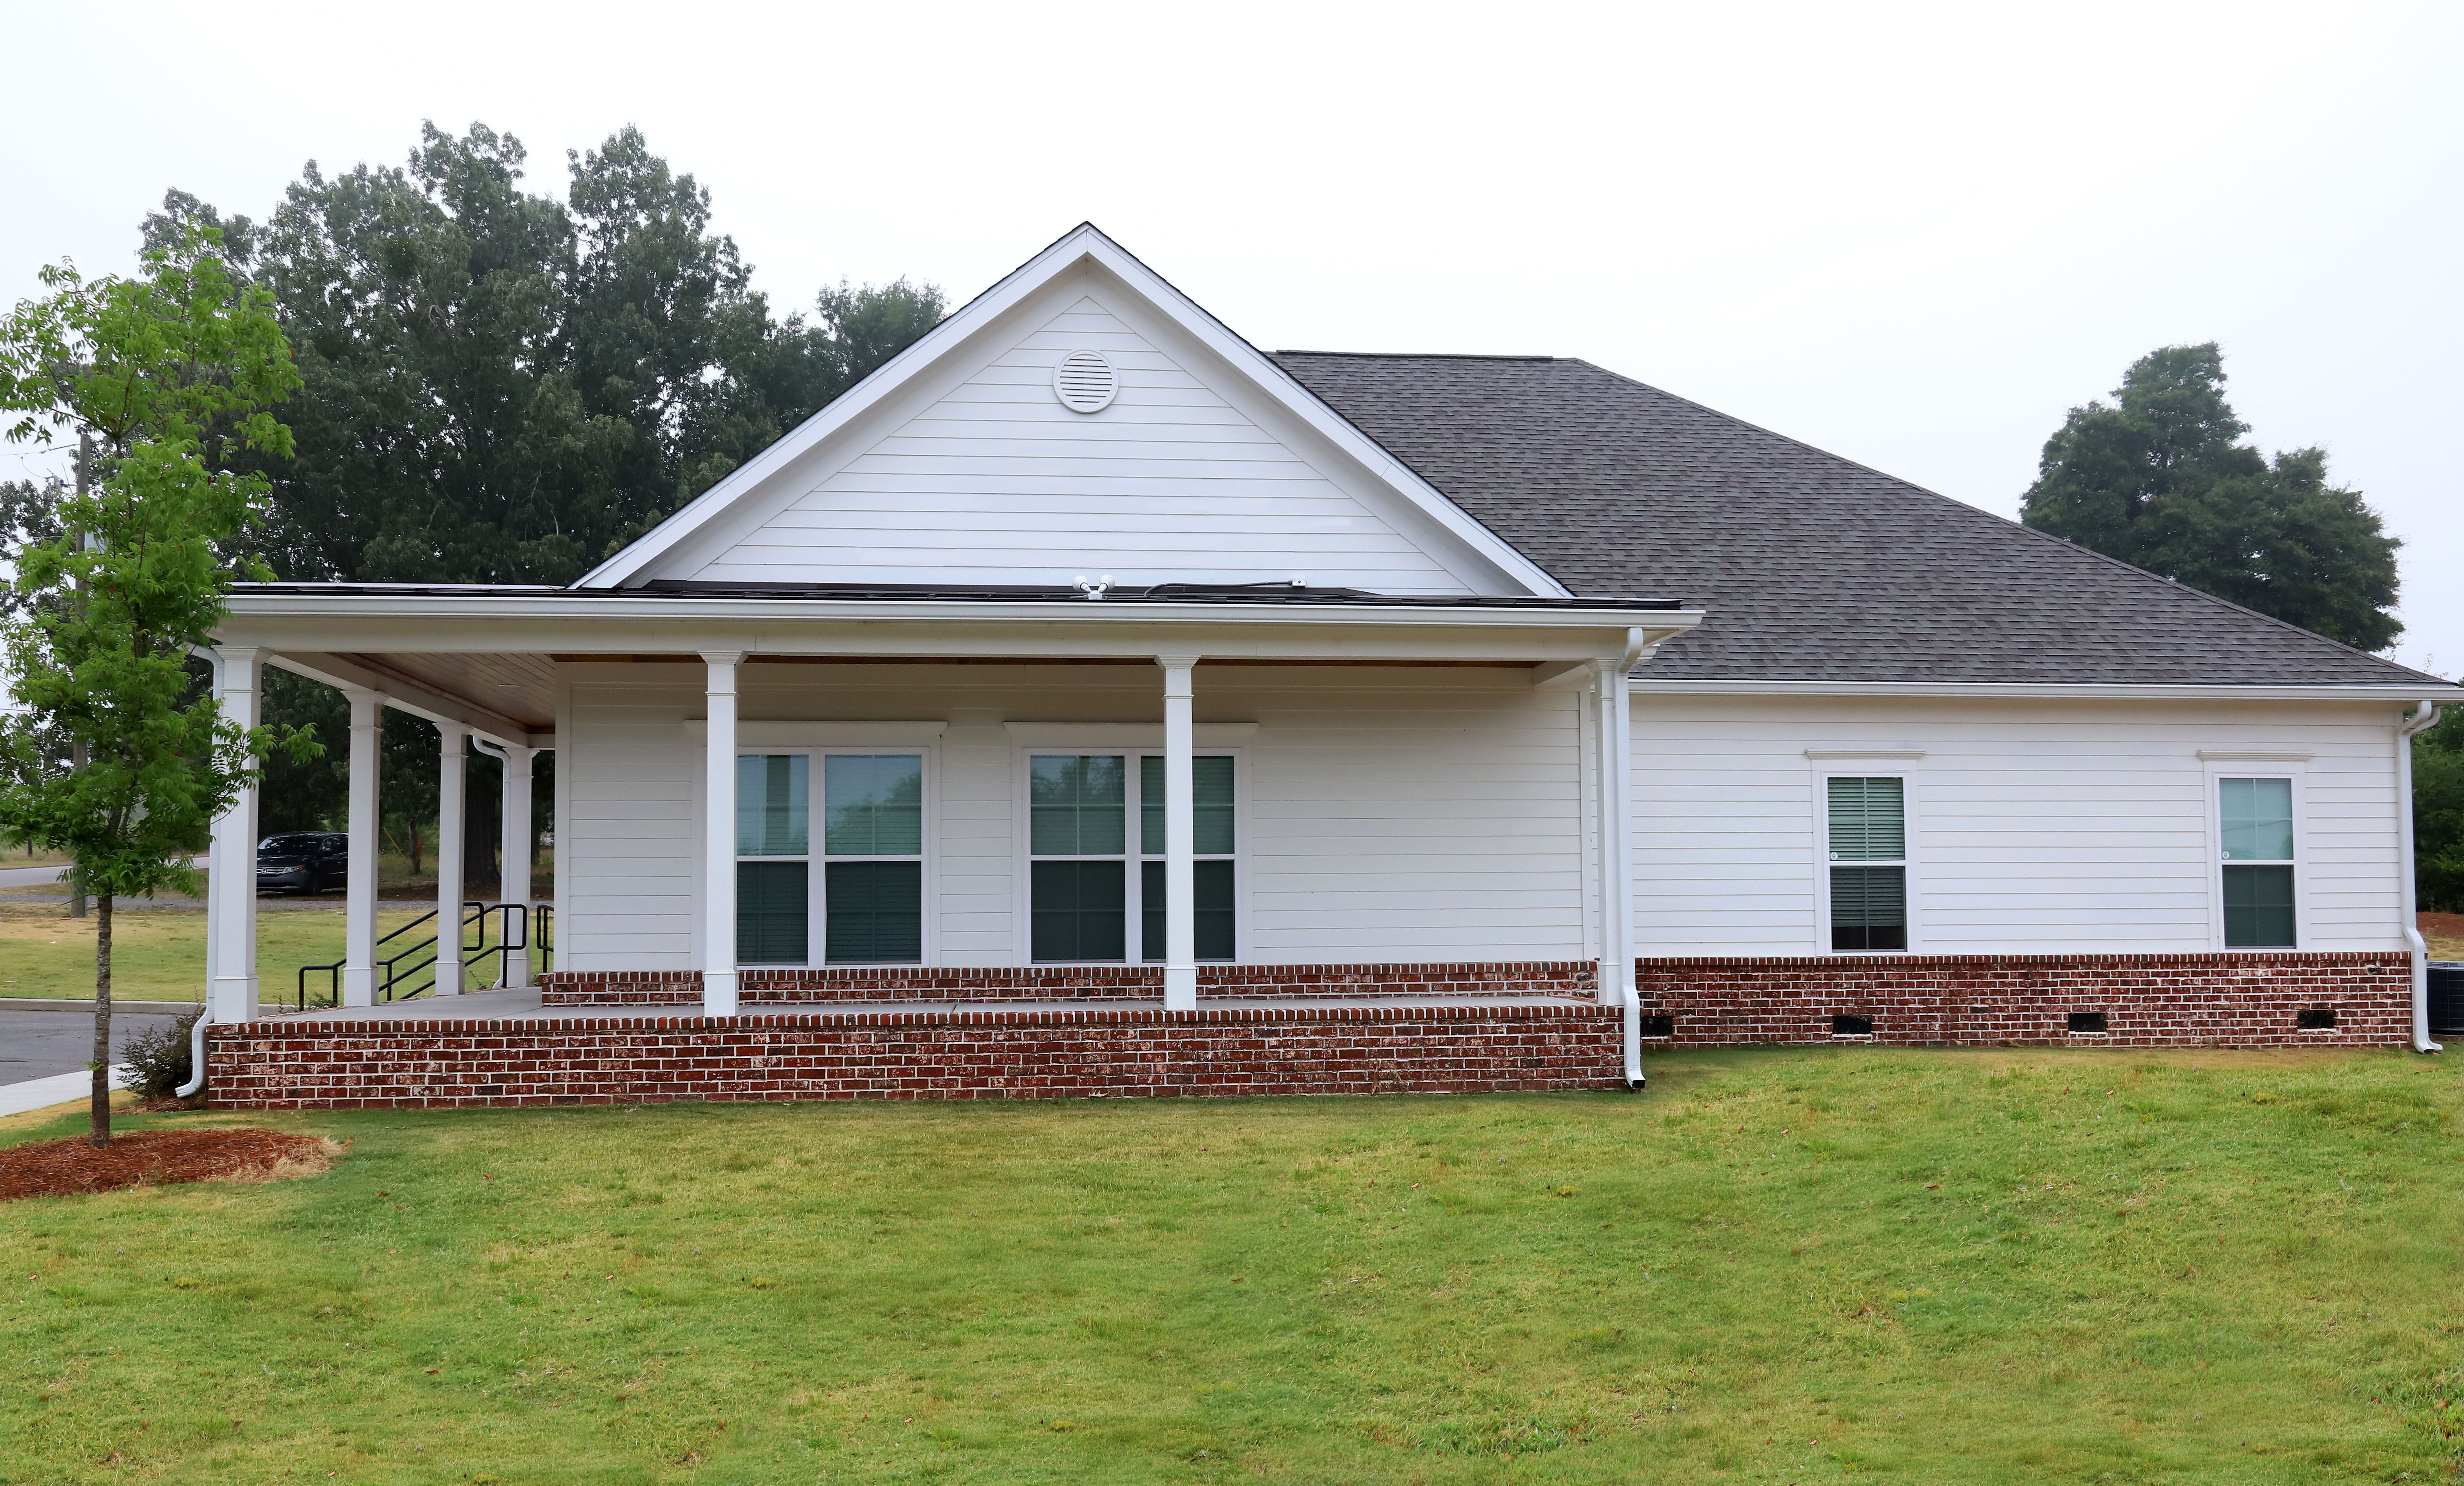 Side view of Westmoreland Family Dentistry dental practice